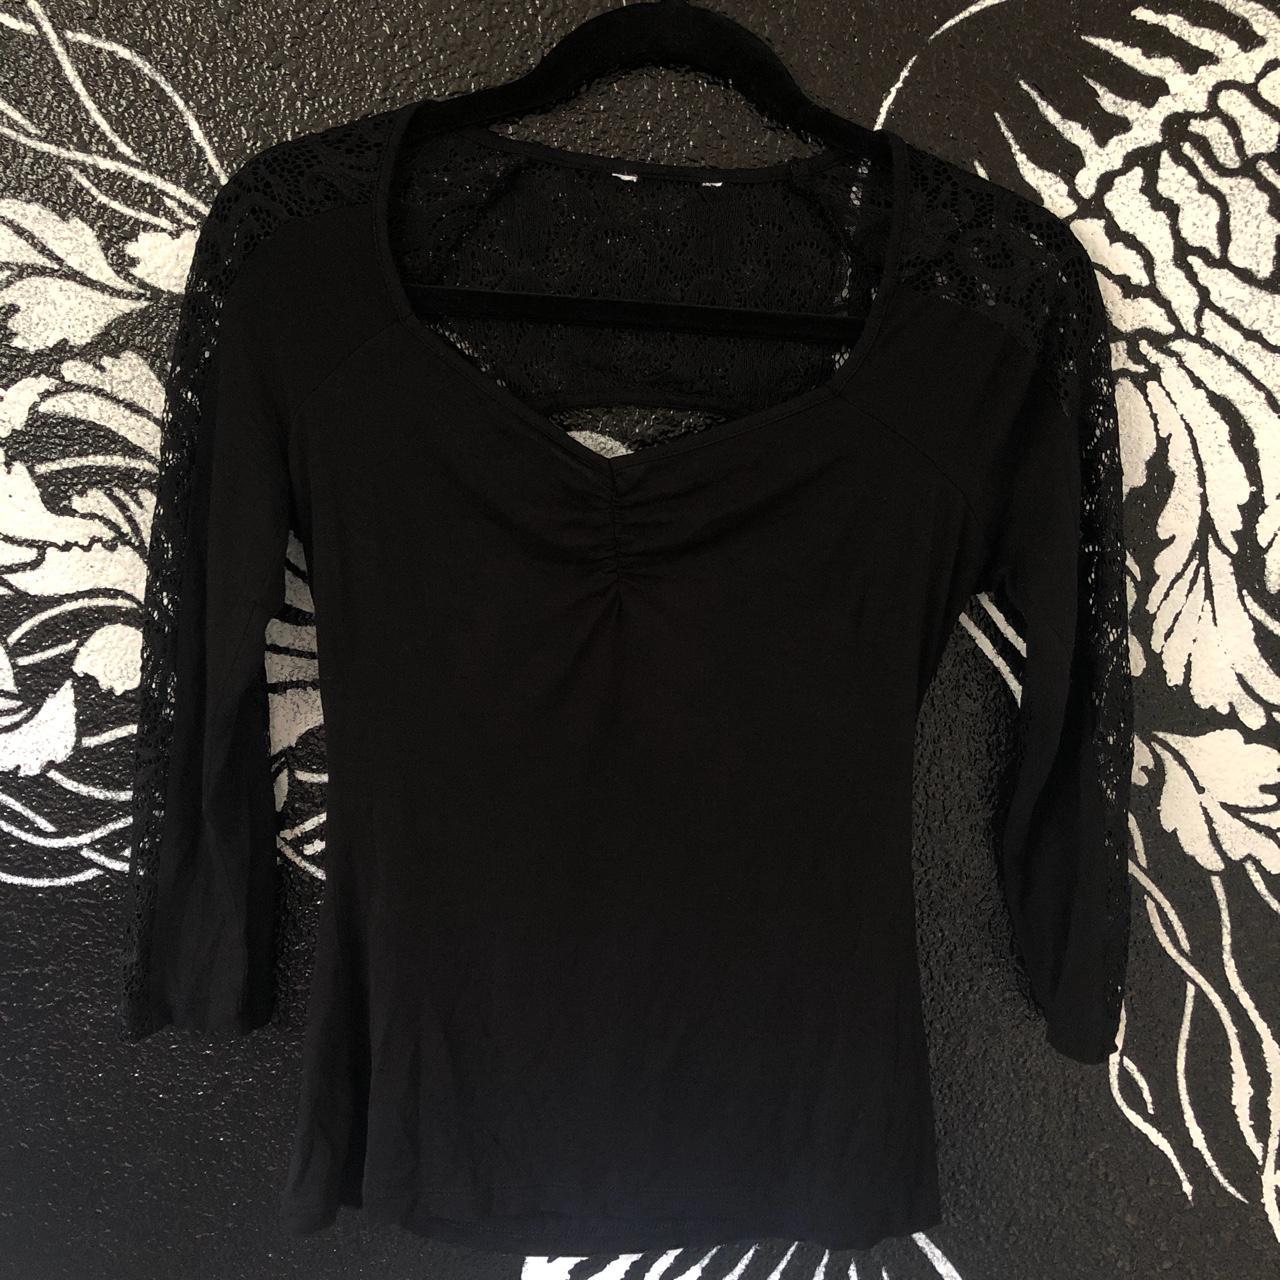 Black Lace 3/4 Sleeve Top size small! Never worn!... - Depop